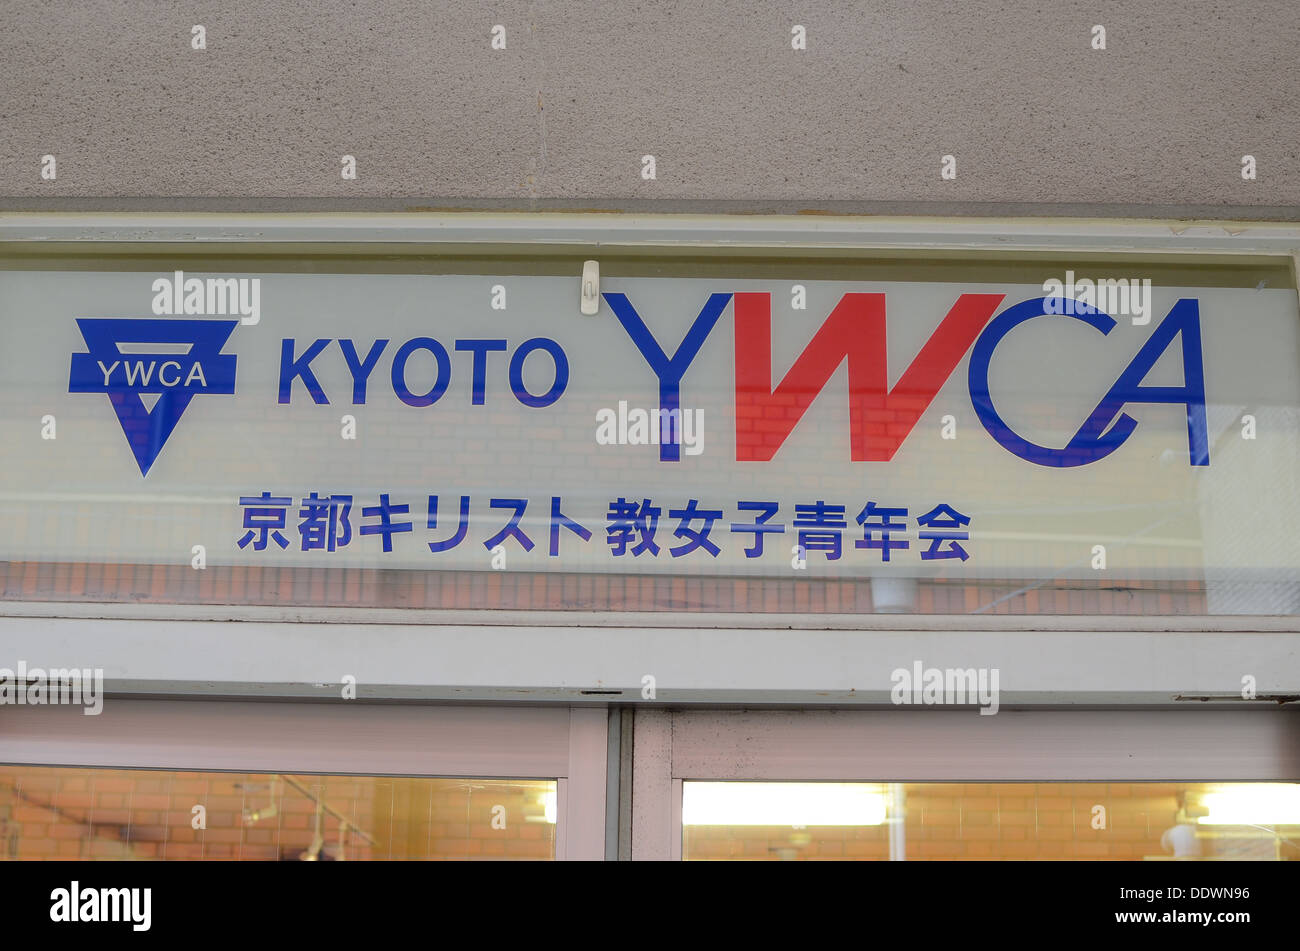 The Young Women's Christian Association (YWCA) in Kyoto, Japan. Stock Photo